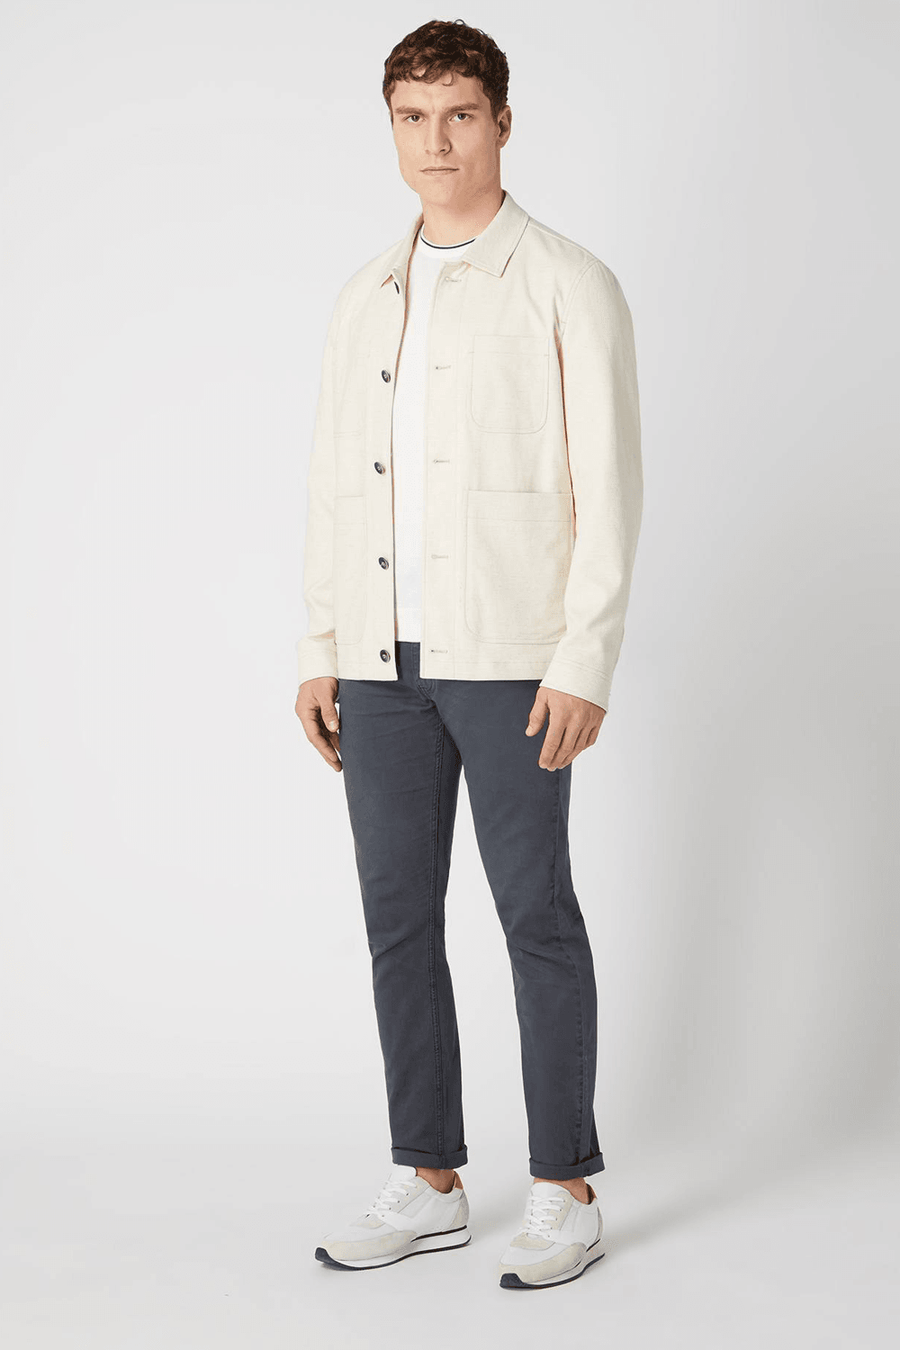 Buy the Remus Uomo Casual Scott Jacket in Beige at Intro. Spend £50 for free UK delivery. Official stockists. We ship worldwide.